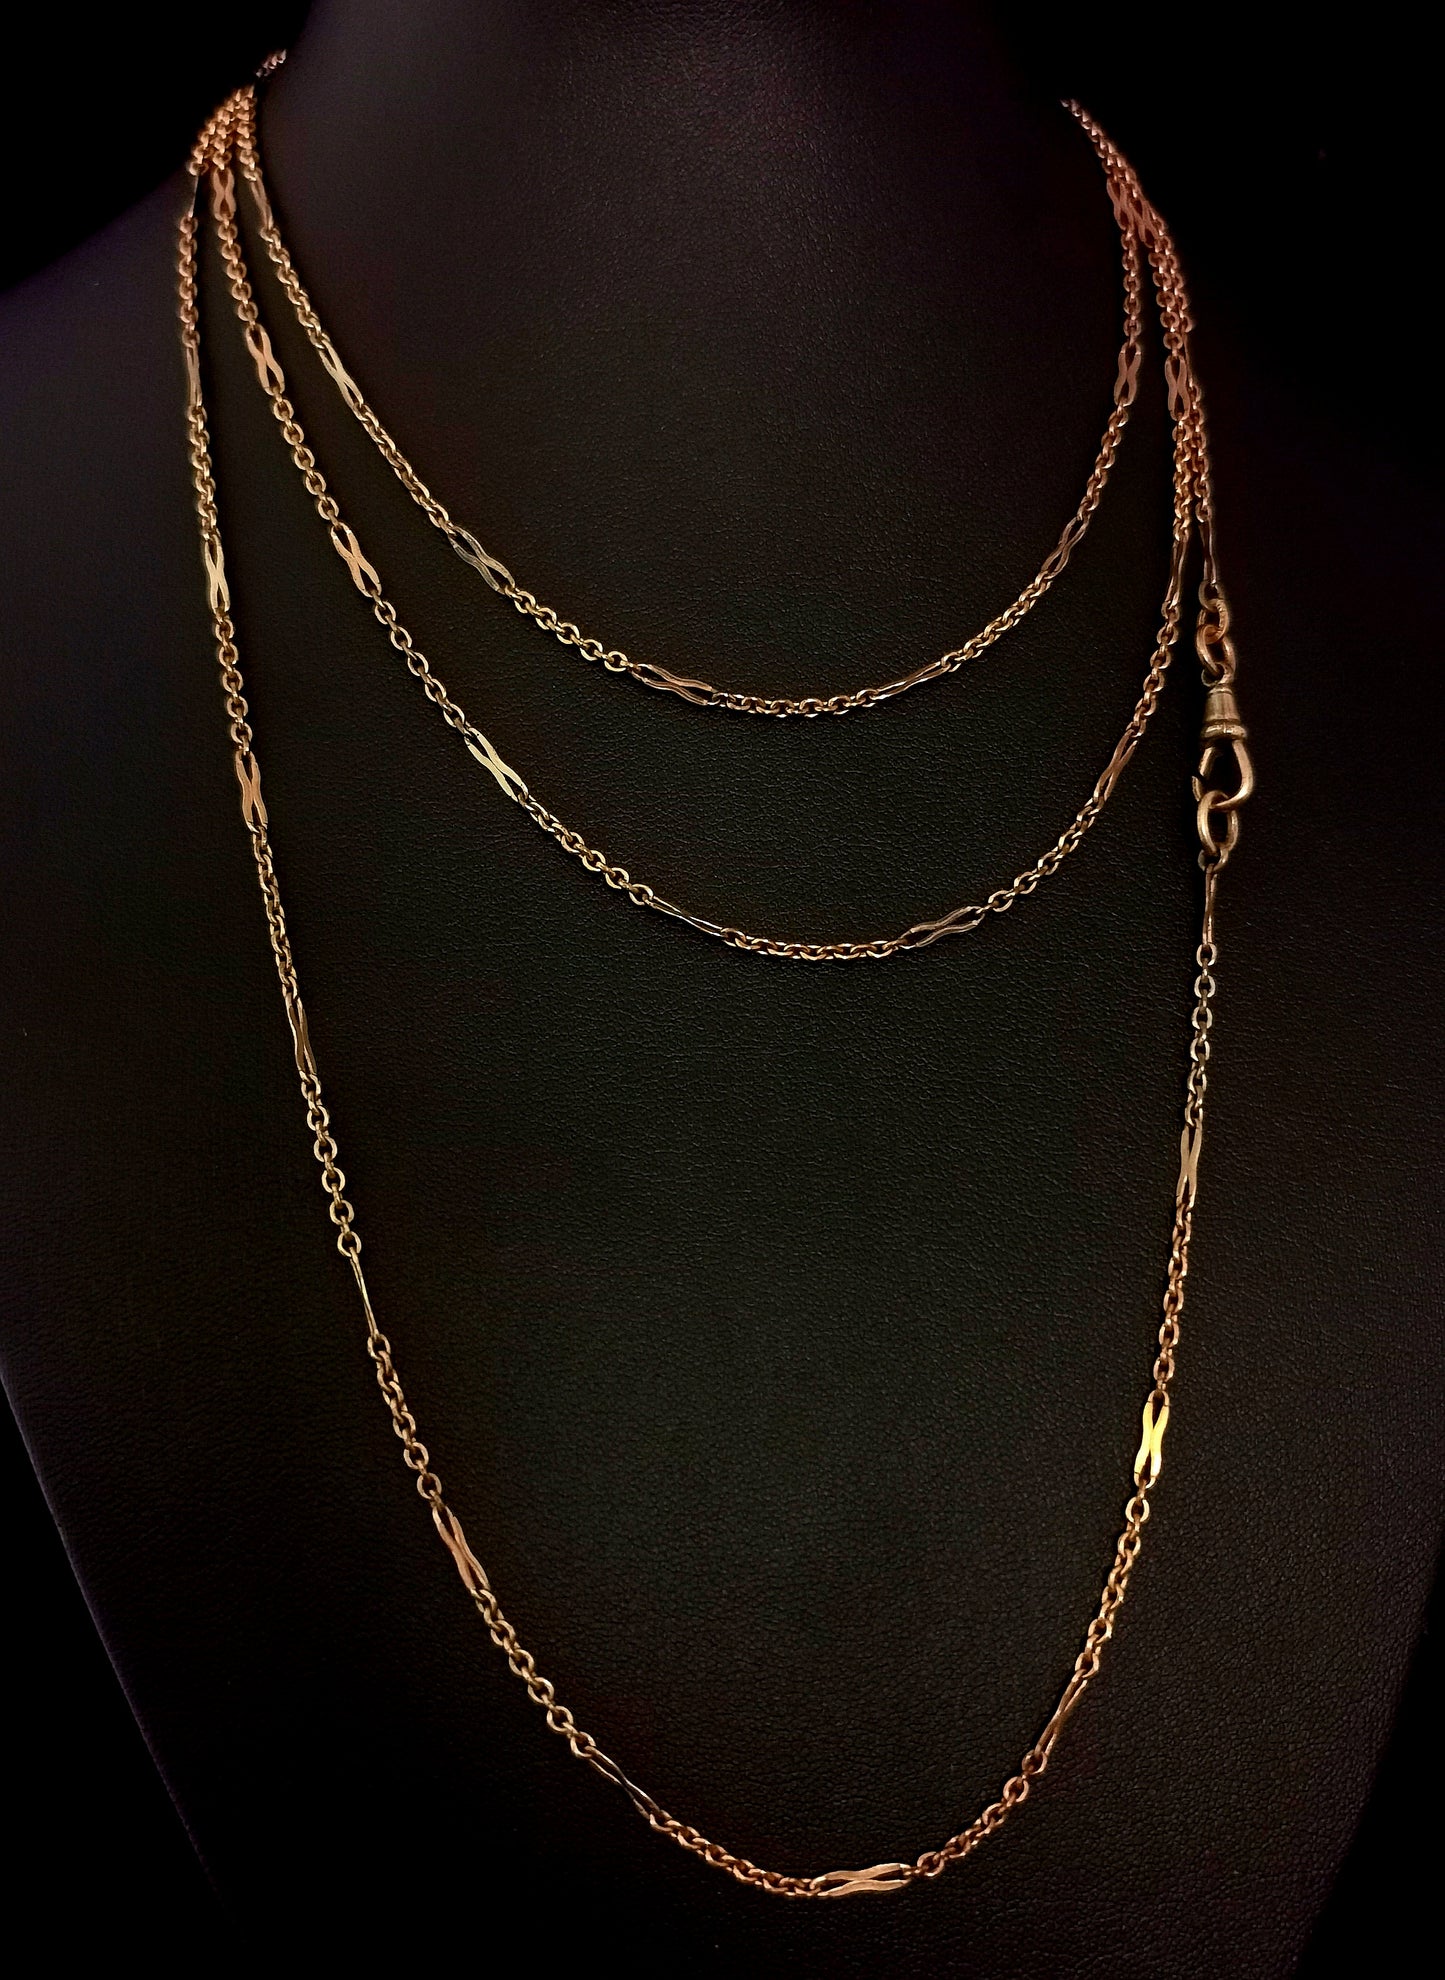 Antique Victorian Rose gold longuard chain, muff chain necklace